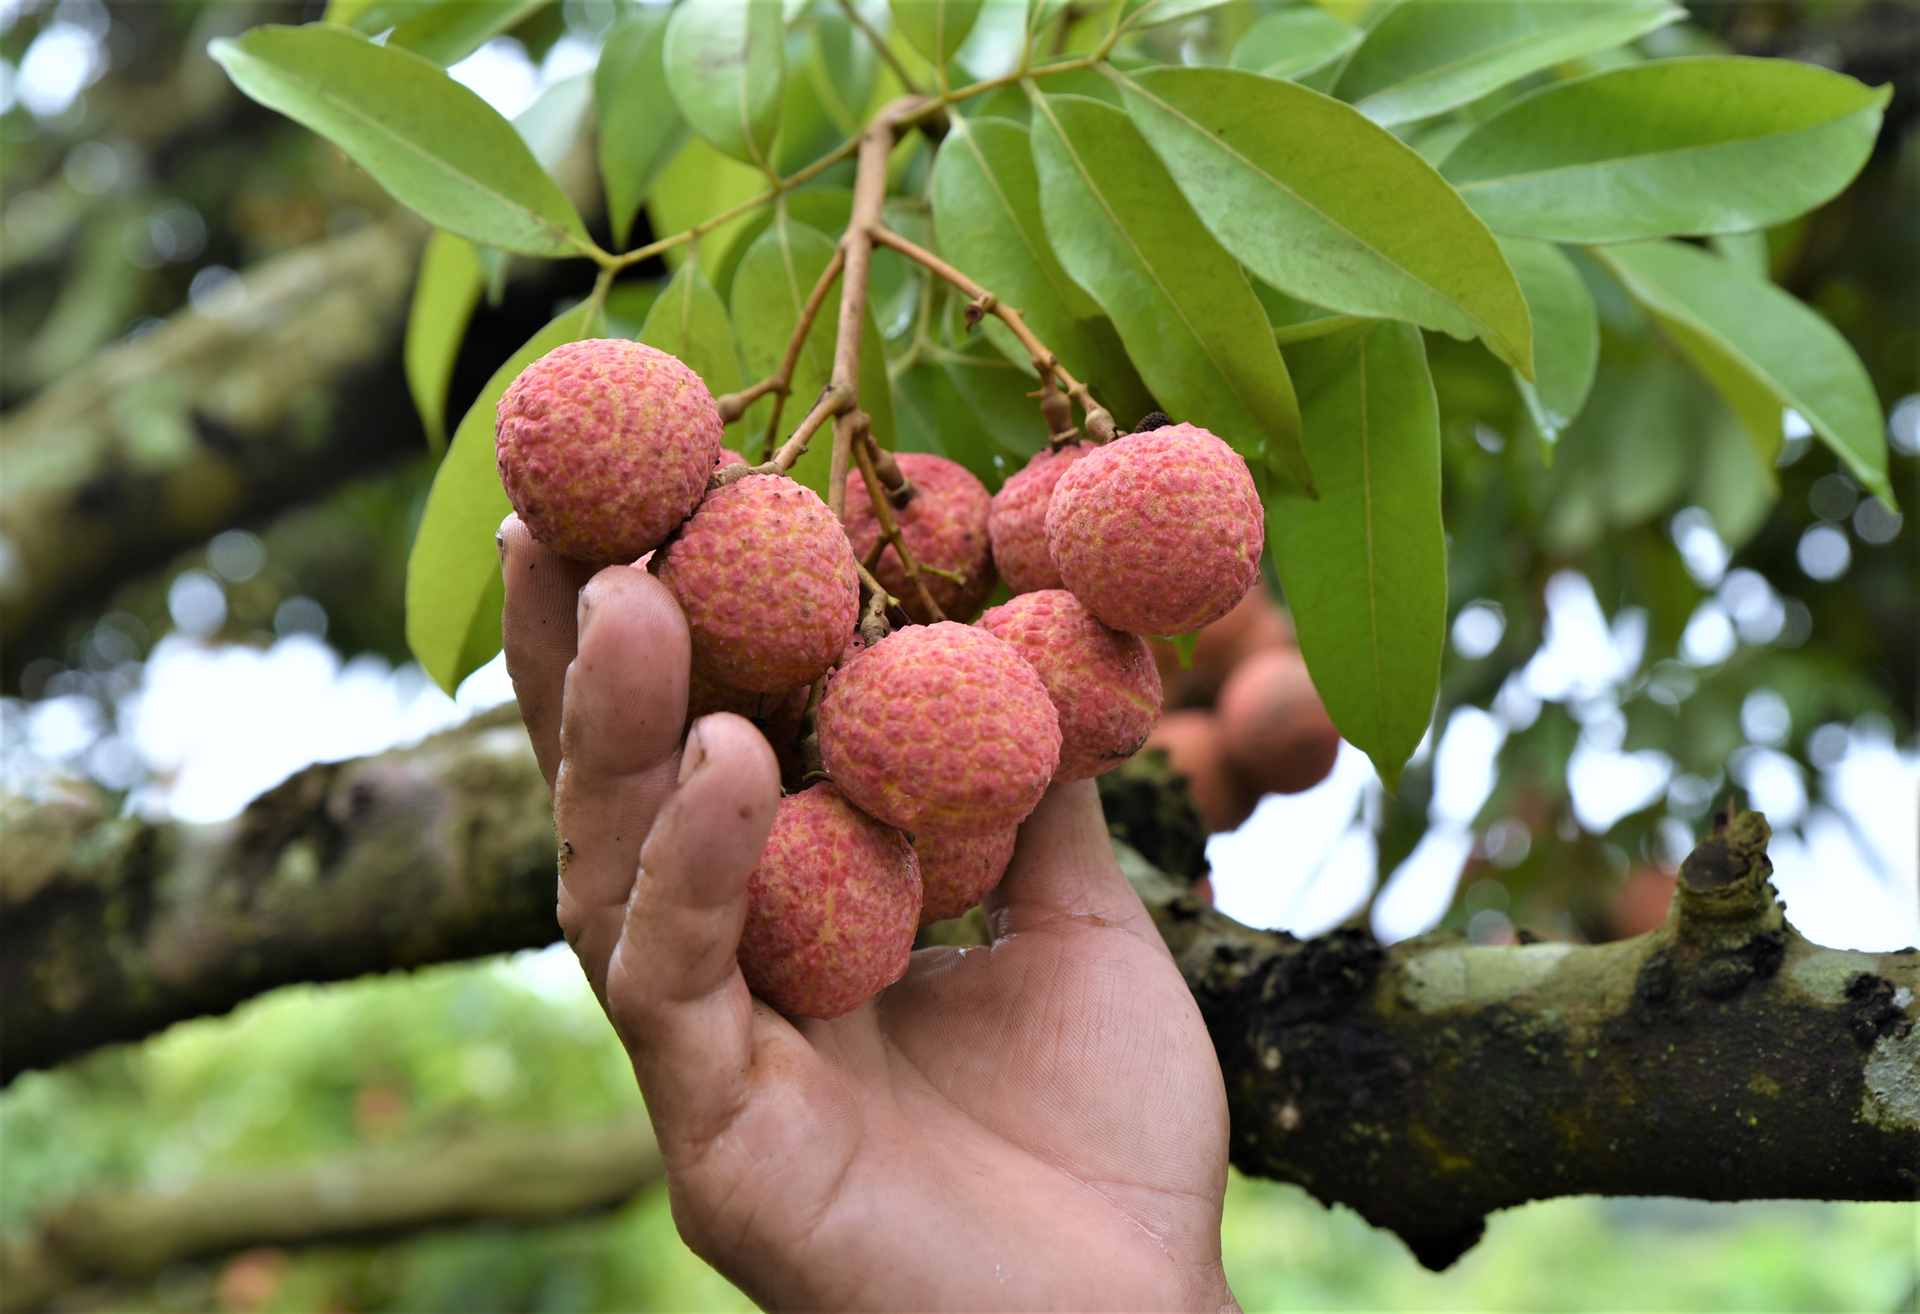 The absence of pesticide residues and the size of the lychee fruit are the two most critical technical requirements for export to the Japanese market. Photo: Pham Hieu.